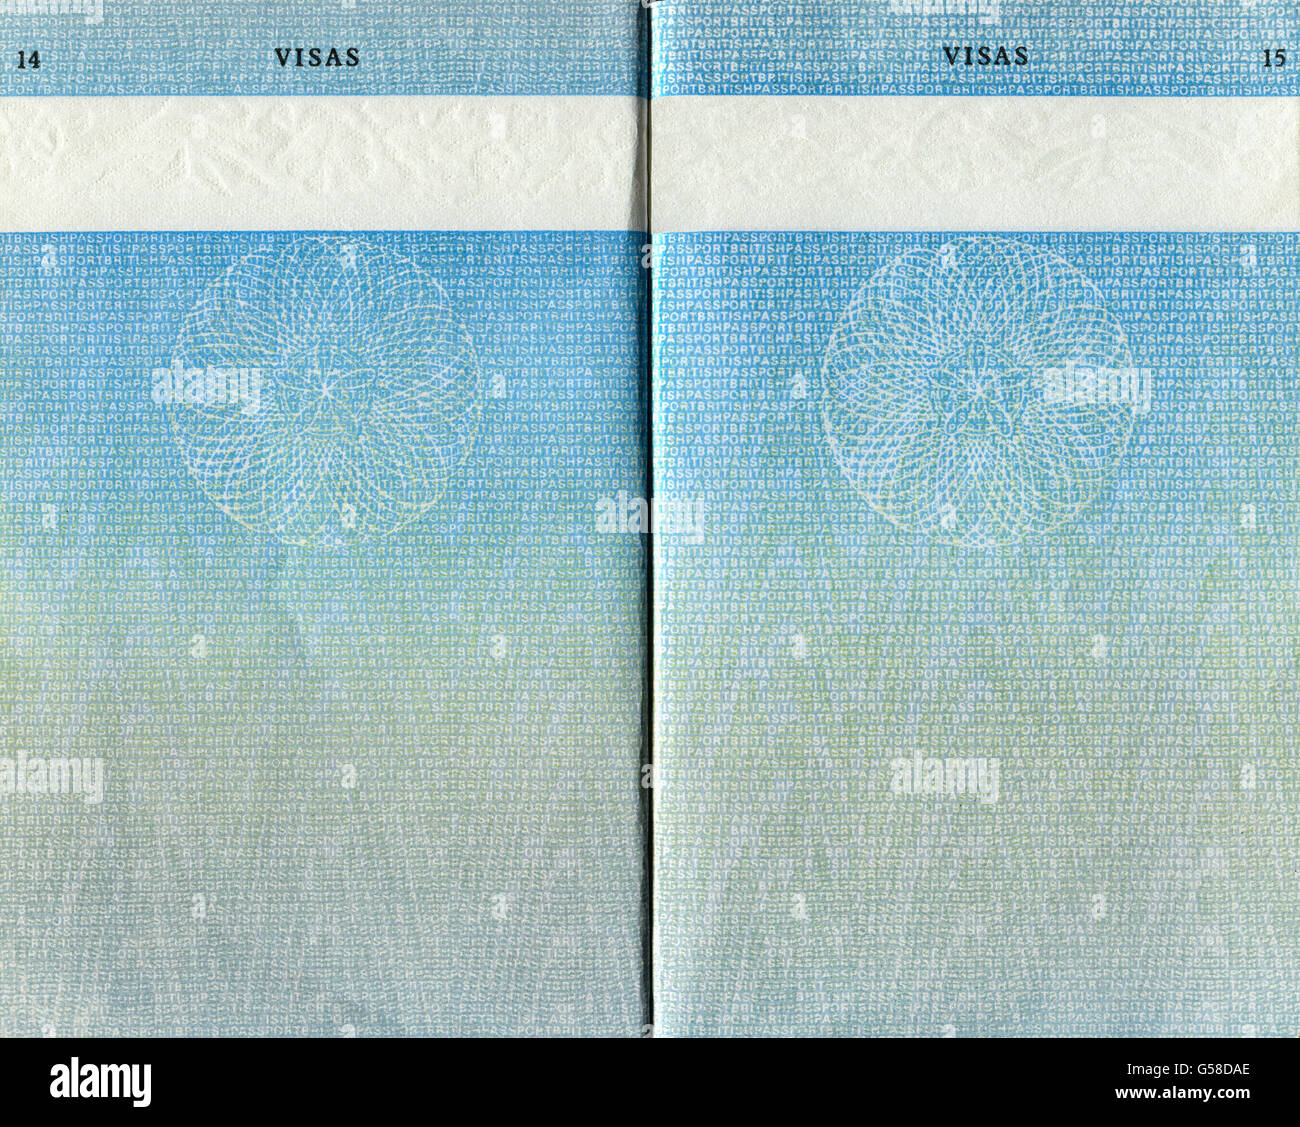 Pages for visas marks of old British Passport as background Stock Photo